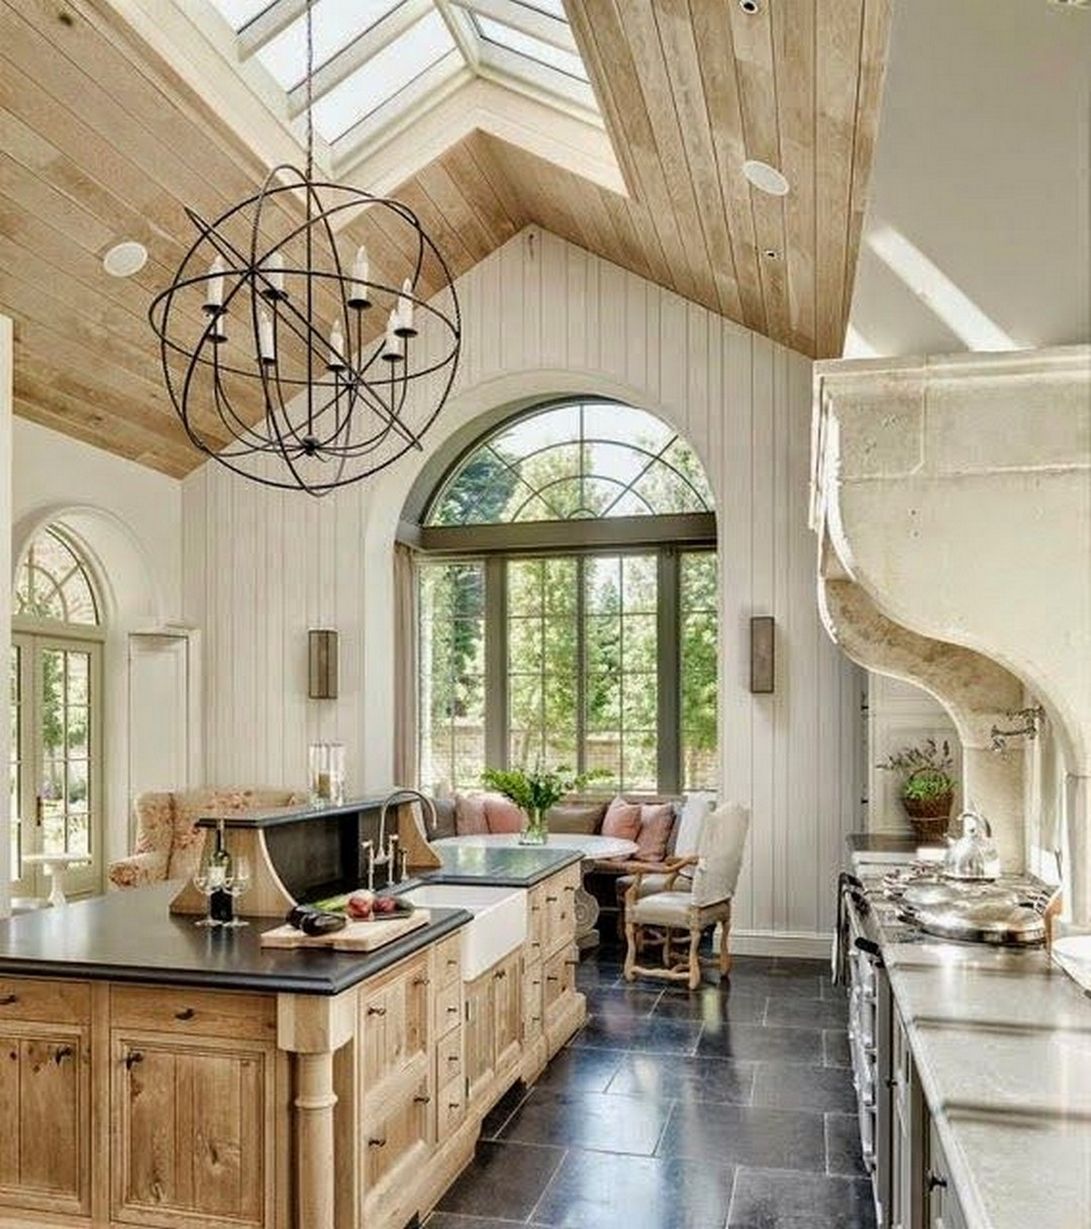 French Country Kitchen 50 Best French Country Kitchen Design Ideas & Redesign Image http://decorspace.net/50-best-french-country-kitchens OCBHLMF